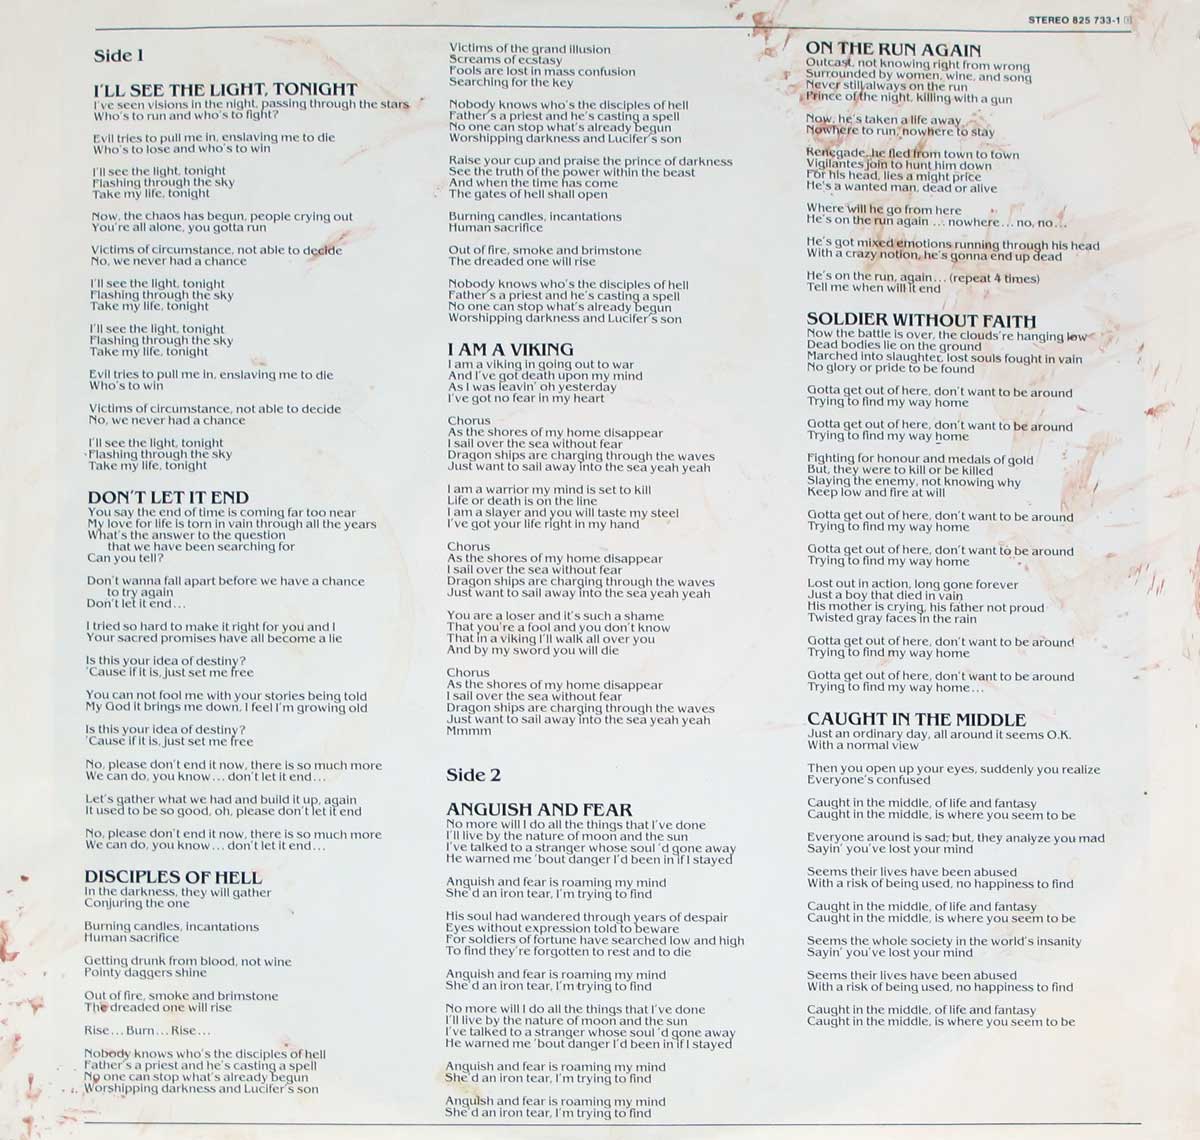 Lyrics of "YNGWIE MALMSTEEN'S RISING FORCE - Marching Out" Printed on the Album's Inner Sleeve  